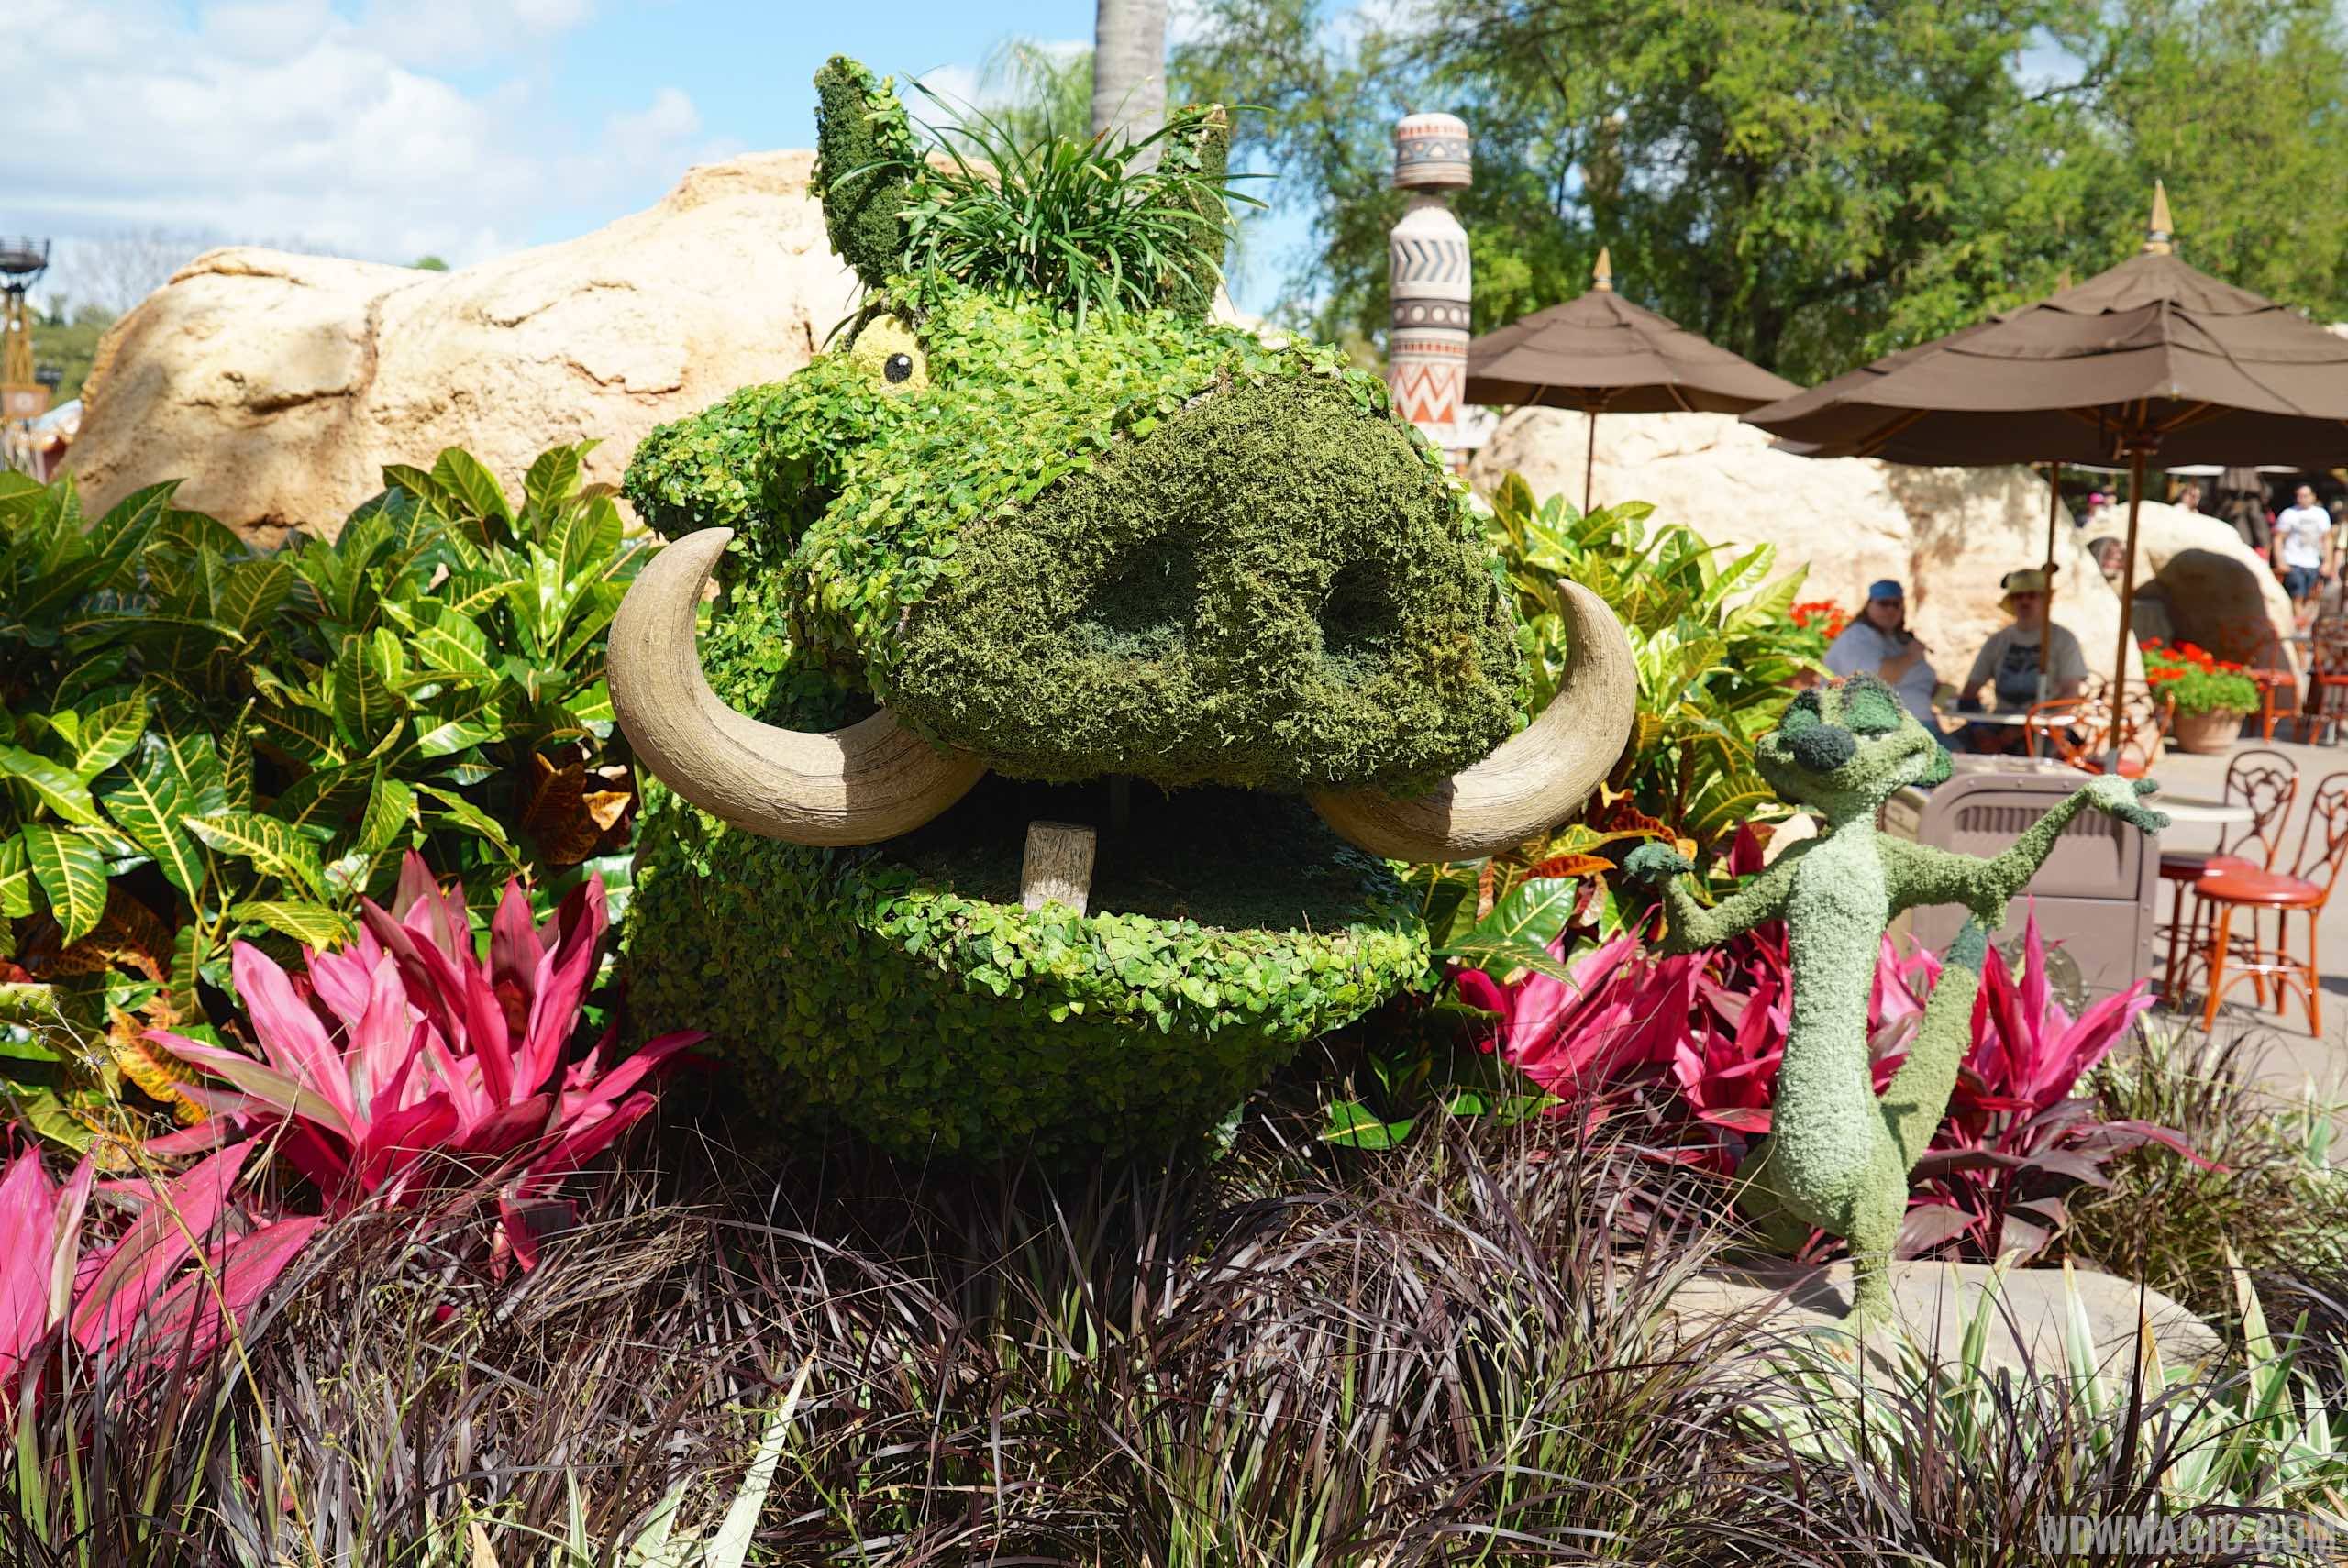 2015 Epcot Flower and Garden Festival - Timon and Pumba topiary